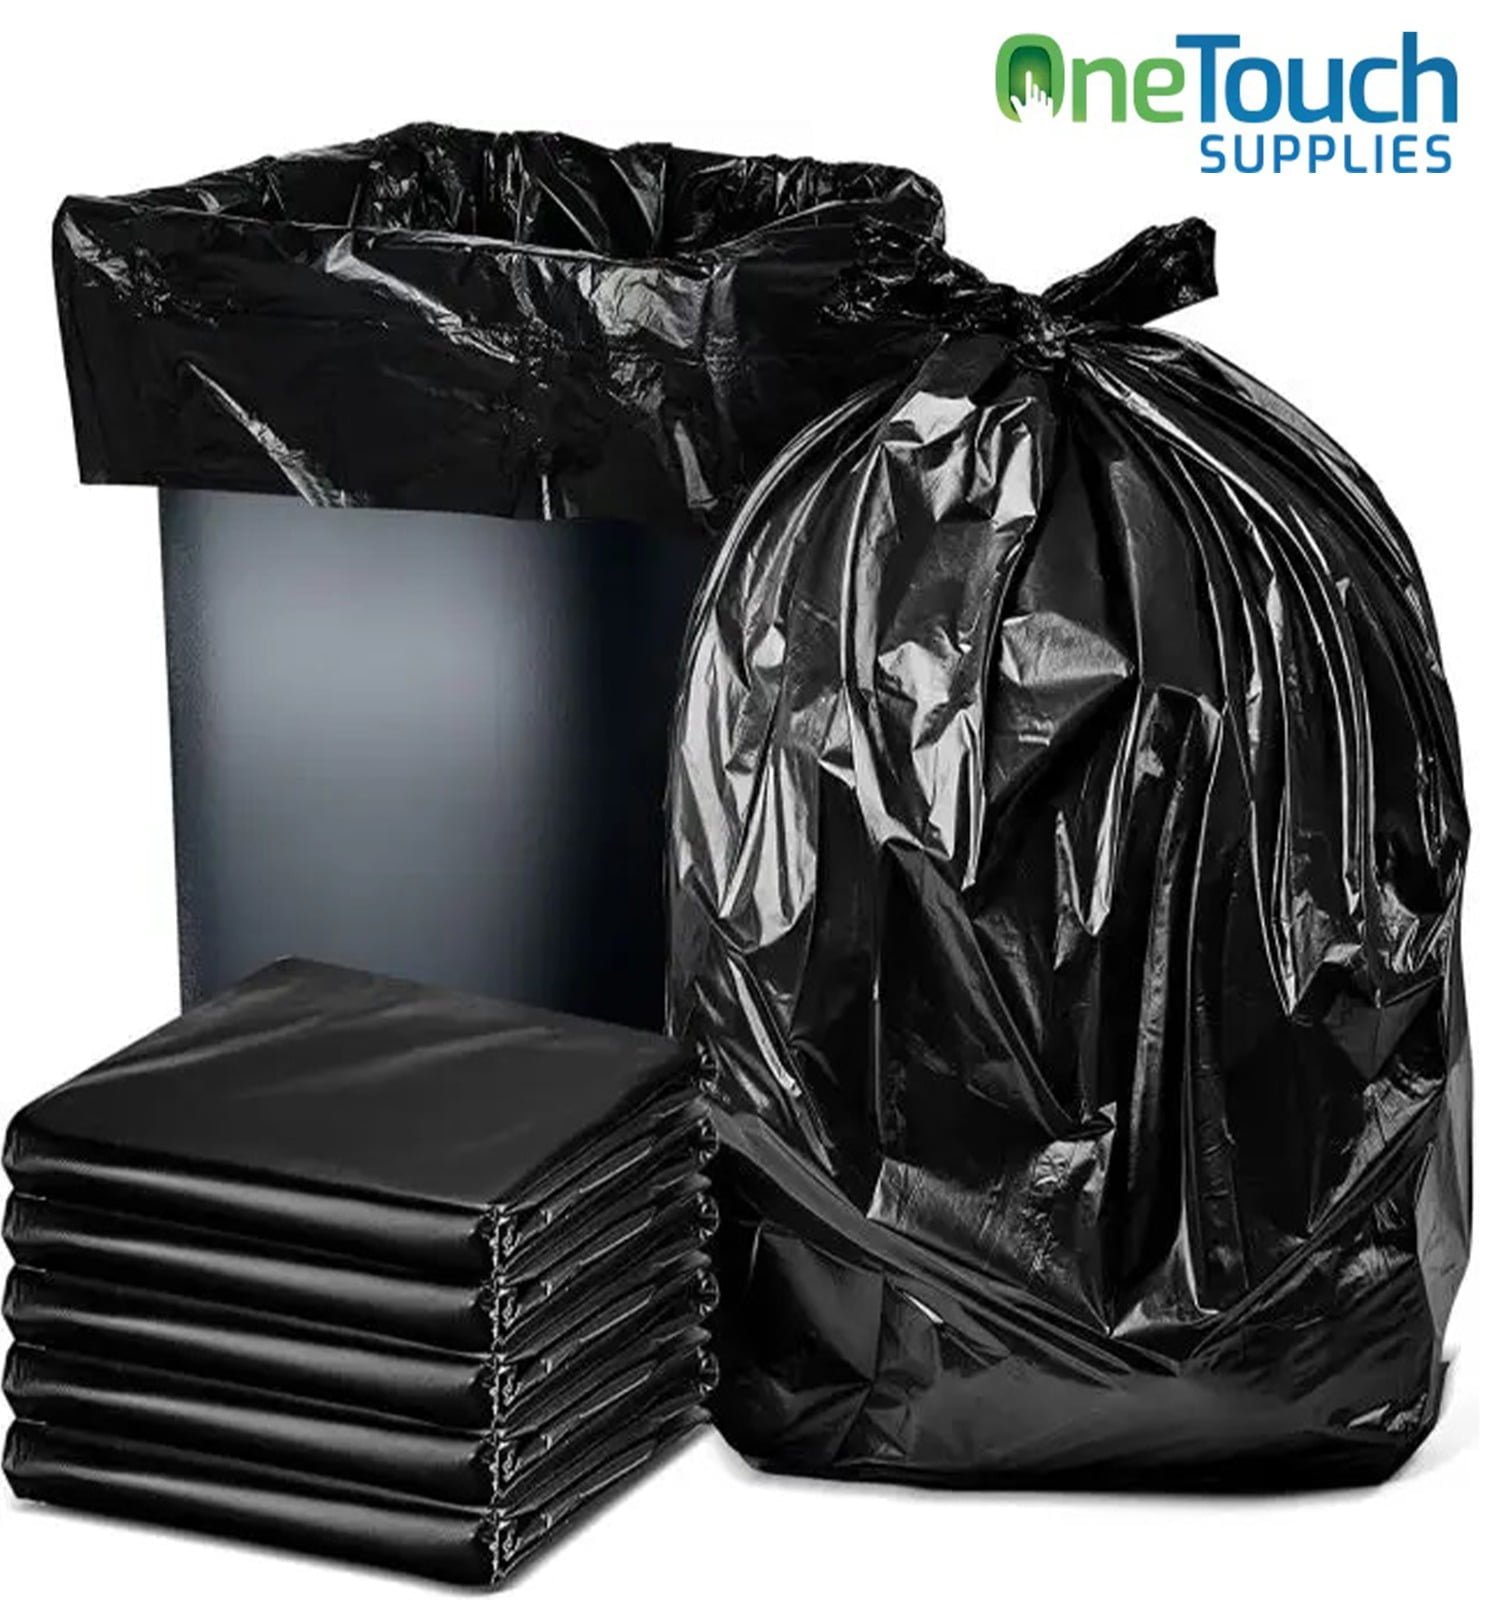 Pack of 200 Heavy-Duty Black Bin Liners, Eco-Friendly and Suitable for Domestic and Commercial Use, Dimensions 18x29x39 inches